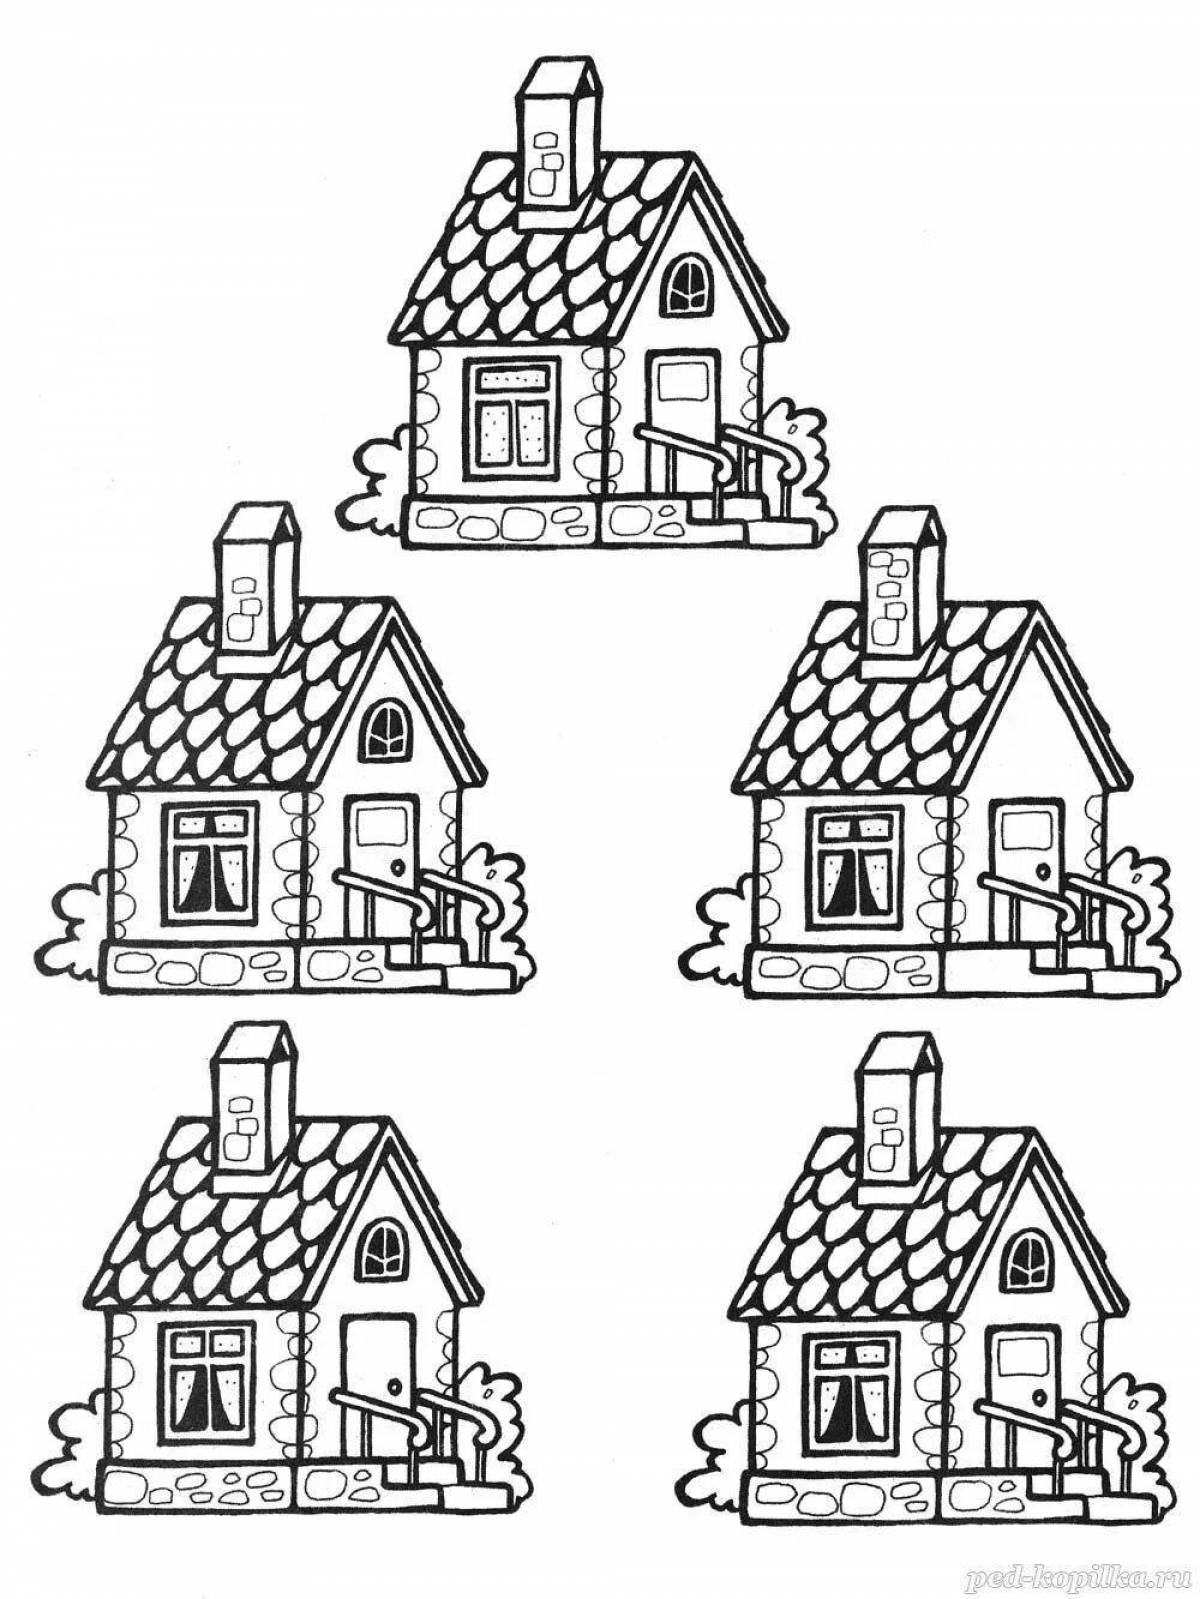 A fun and educational coloring house